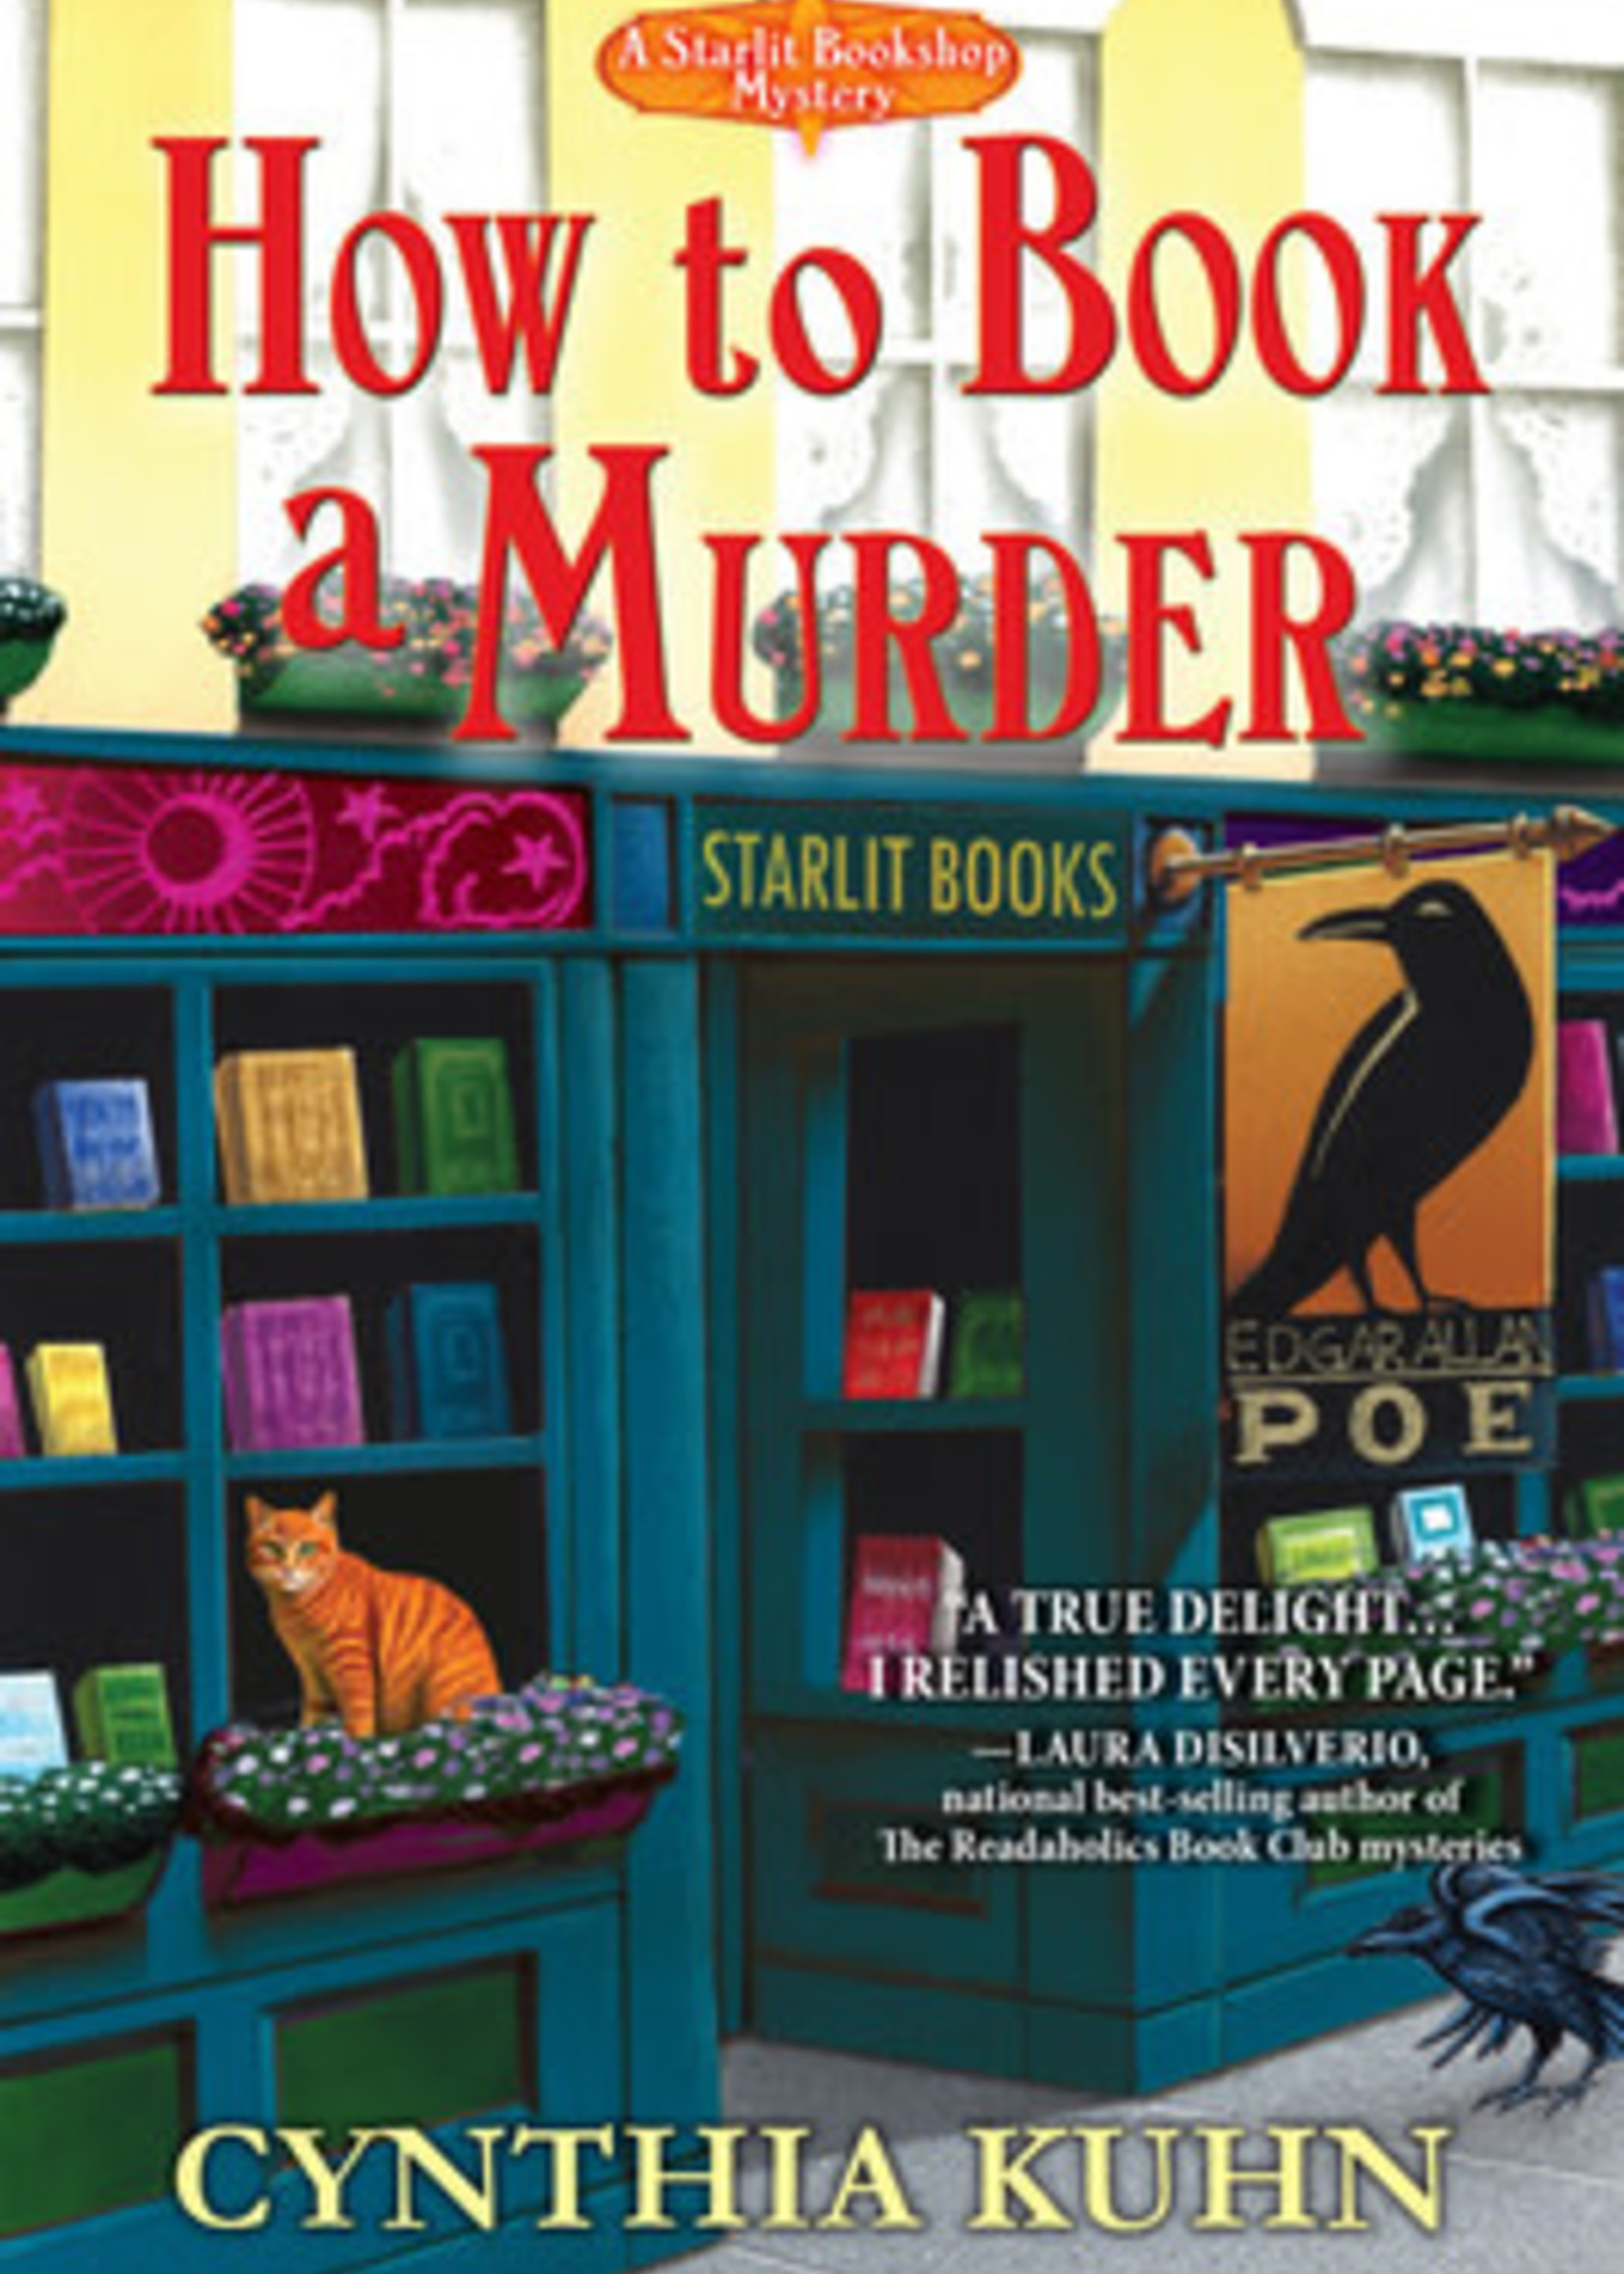 How to Book a Murder (Starlit Bookshop Mystery #1) by Cynthia Kuhn